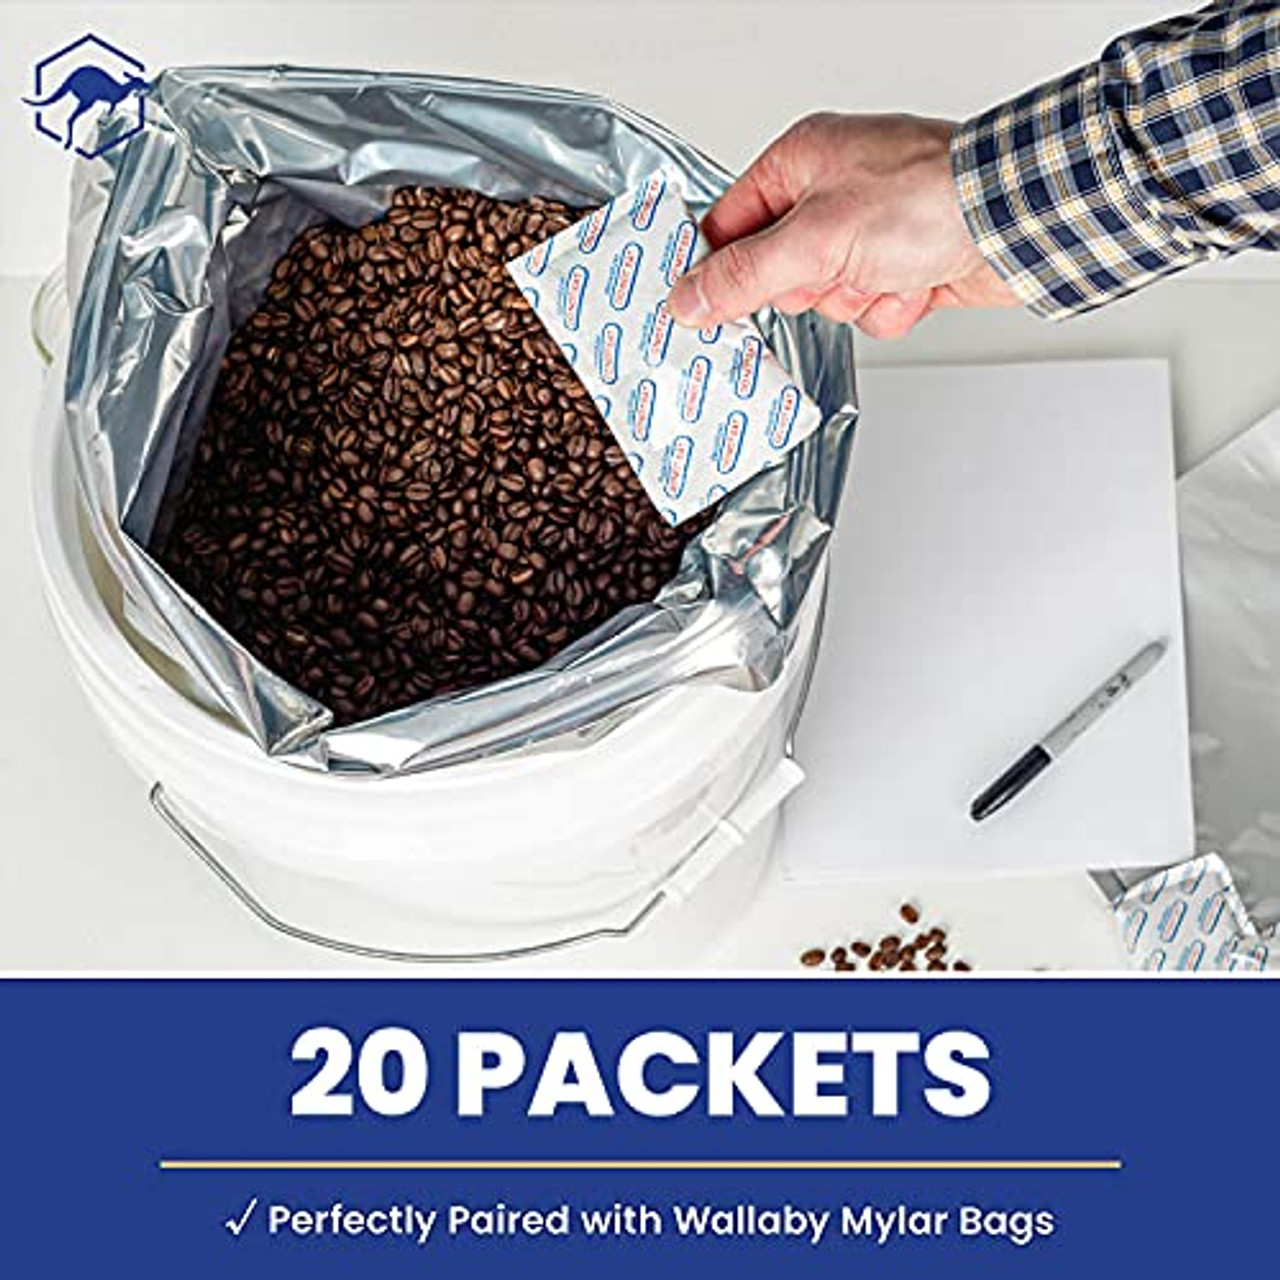 Wallaby 15X 5 Gallon Wallaby Mylar Bag Bundle - Silver (5 mil) with 20 Single Sealed Oxygen Absorbers & Labels - Resealable Zipper, FDA